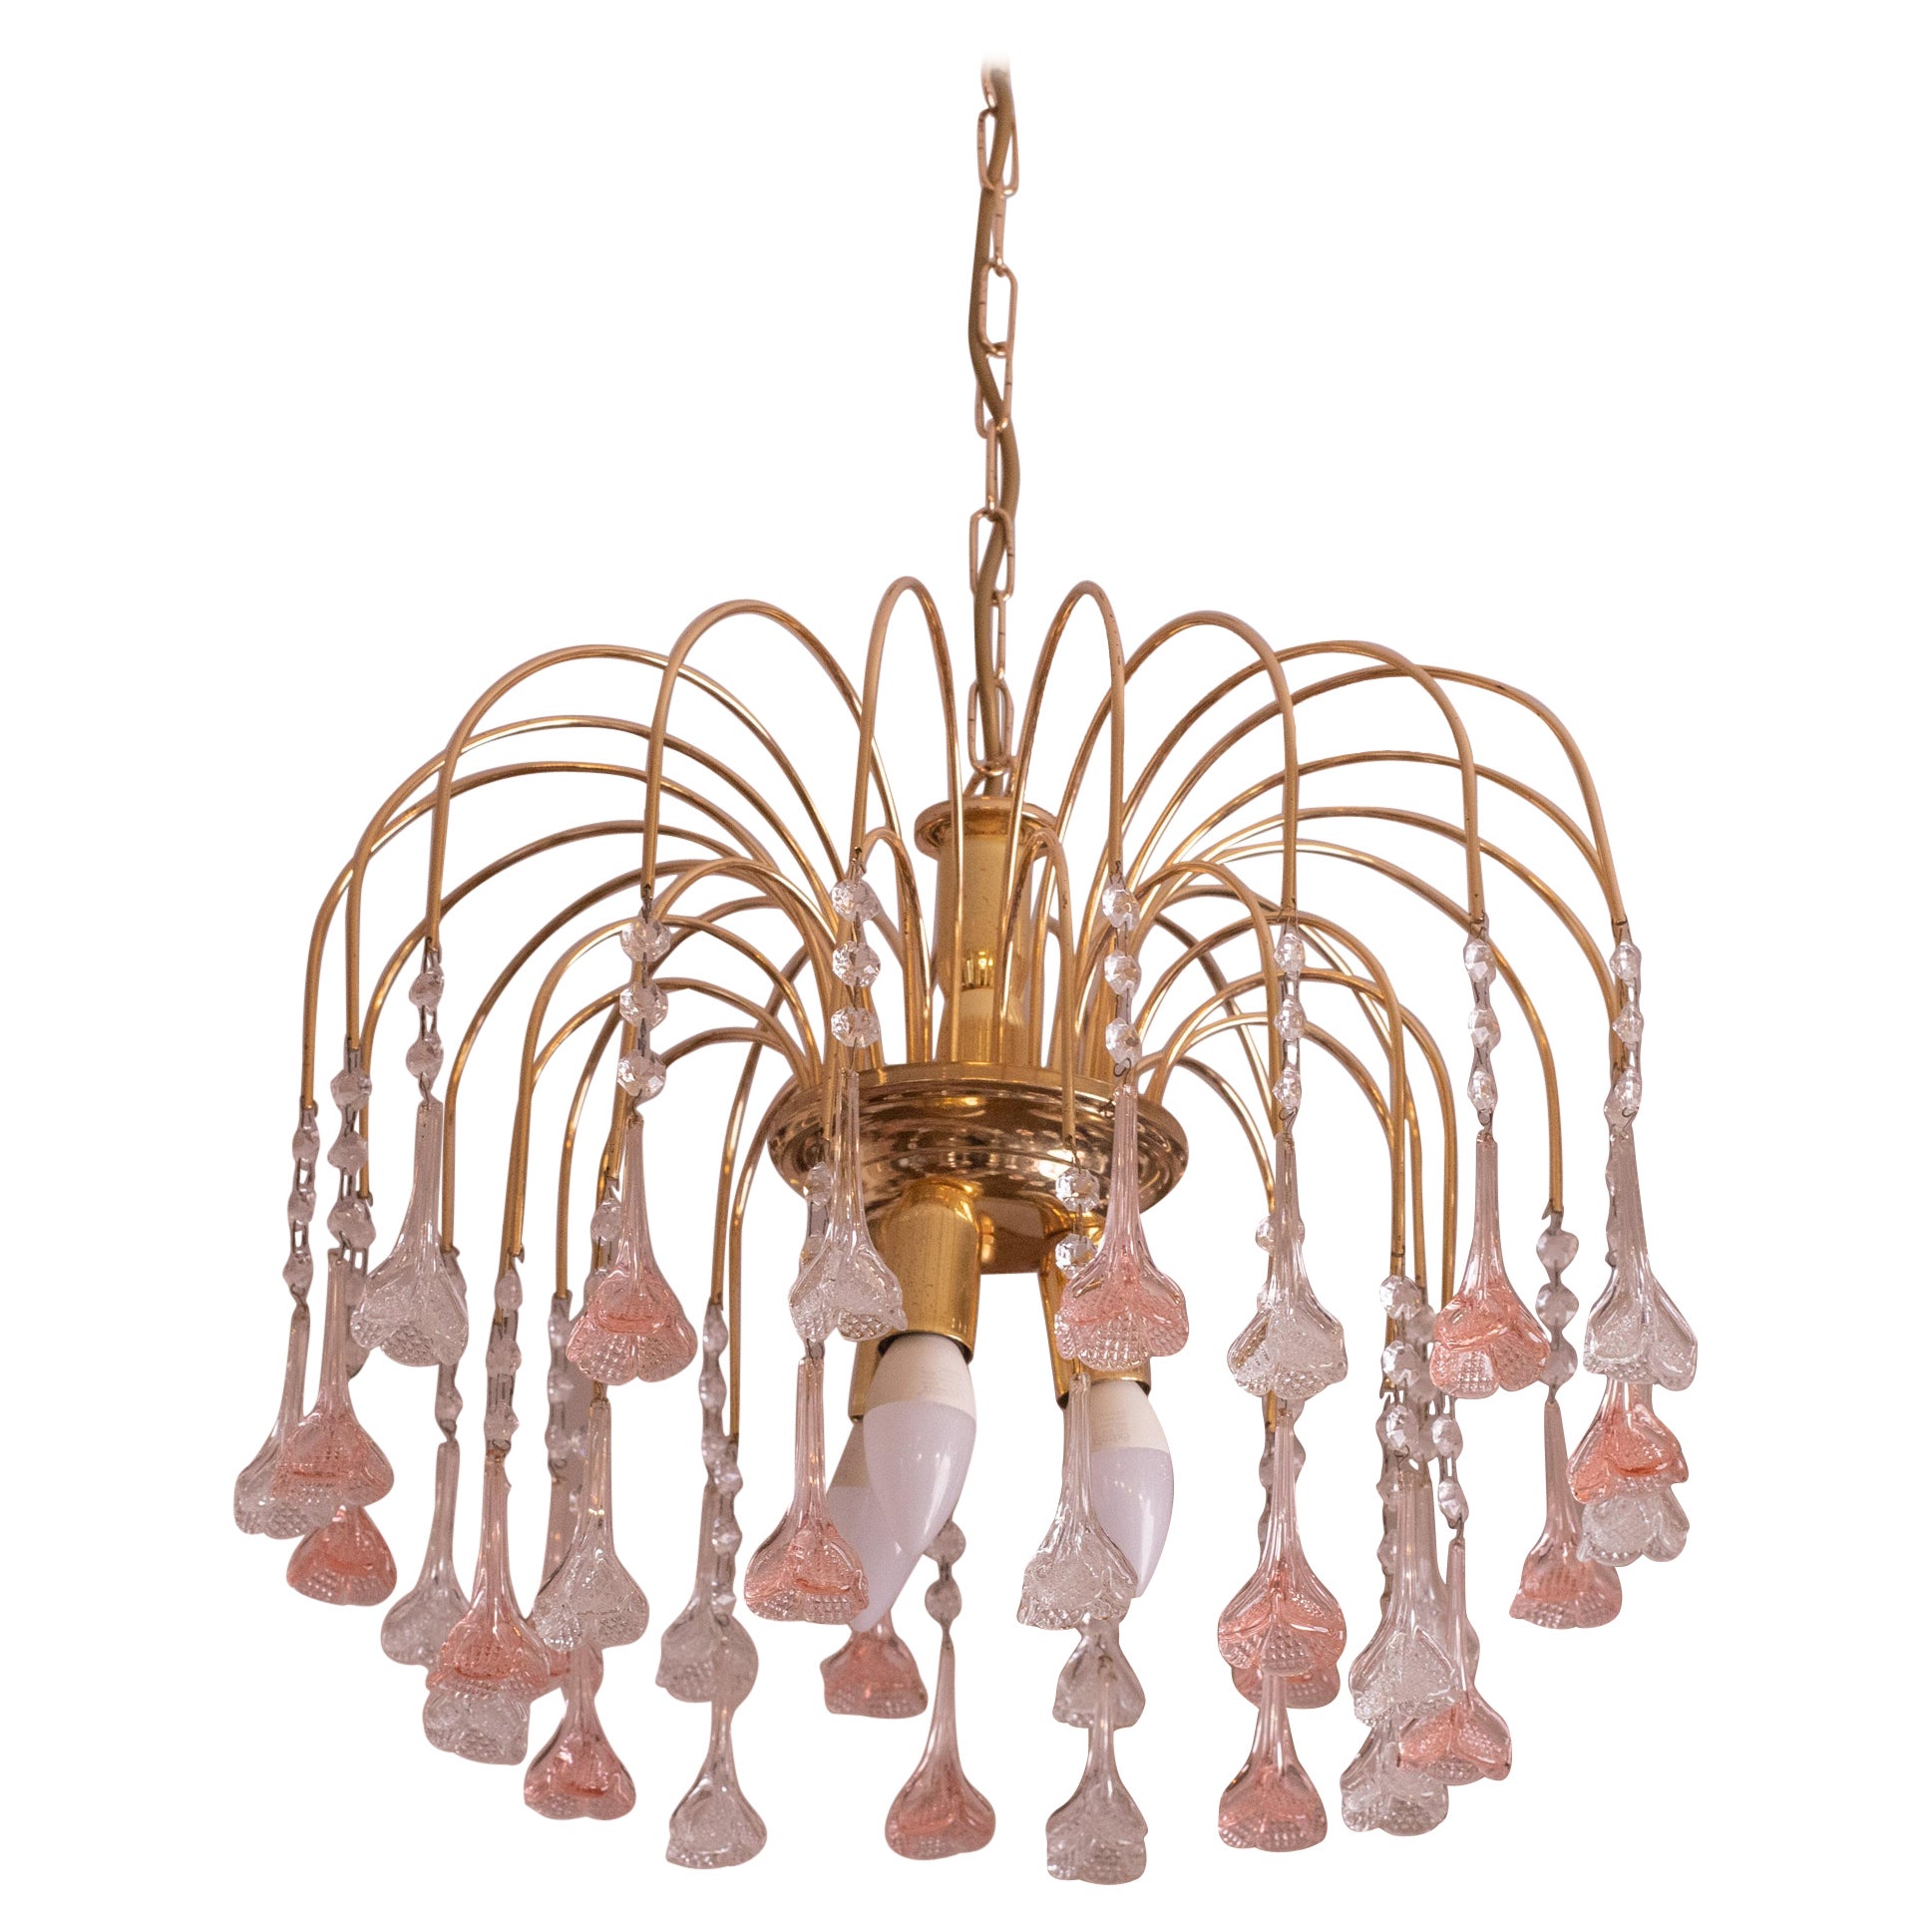 Brigitte Bardot, Pink and Trasparent Murano Flowers Chandelier, 1970s For Sale